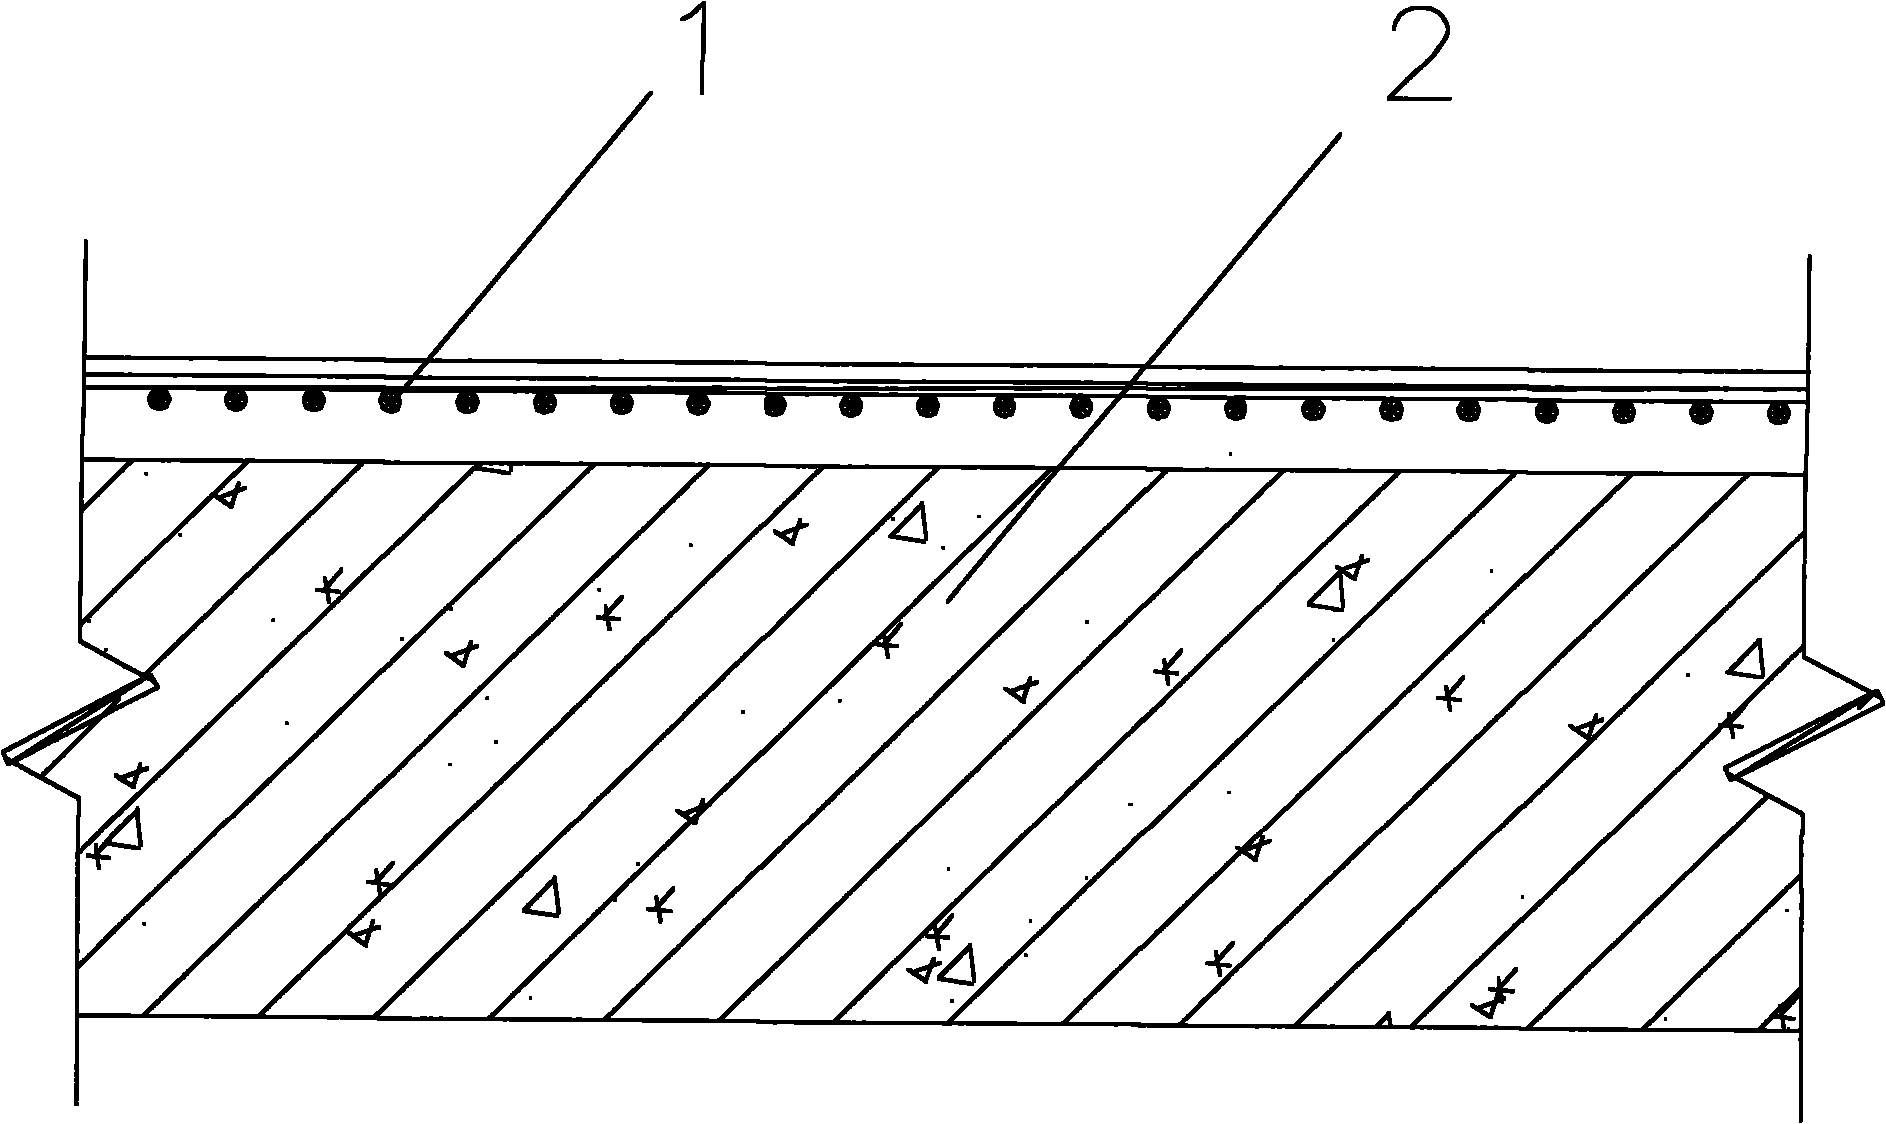 Construction method for modifying conventional structural slab into subway bed foundation